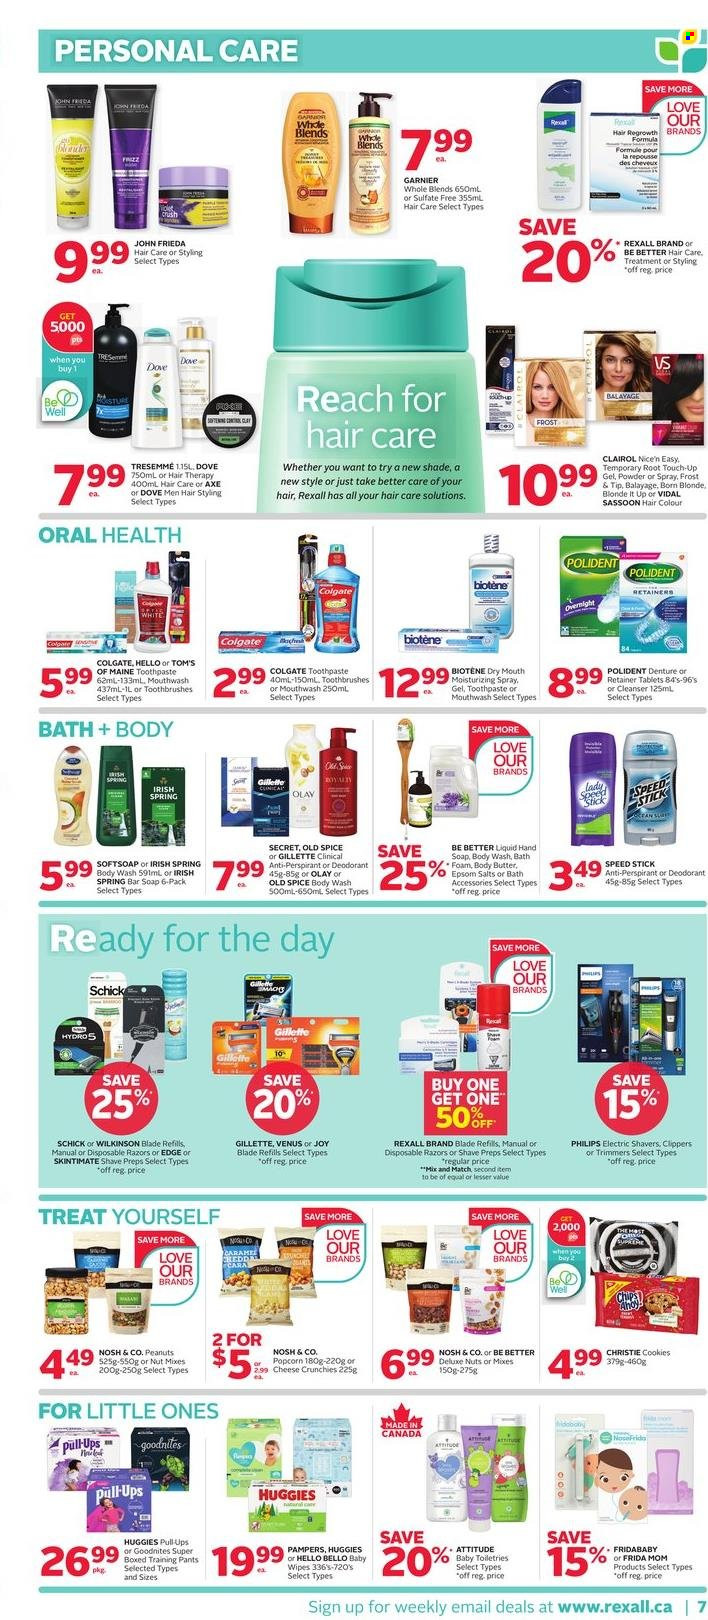 thumbnail - Circulaire Rexall - 24 Mars 2023 - 30 Mars 2023 - Produits soldés - cookies, popcorn, chips, Dove, Axe, Garnier, desodorisant, déodorant, Gillette, Wilkinson Sword, Lady Speed Stick, Colgate, Huggies, Old Spice, Pampers. Page 8.